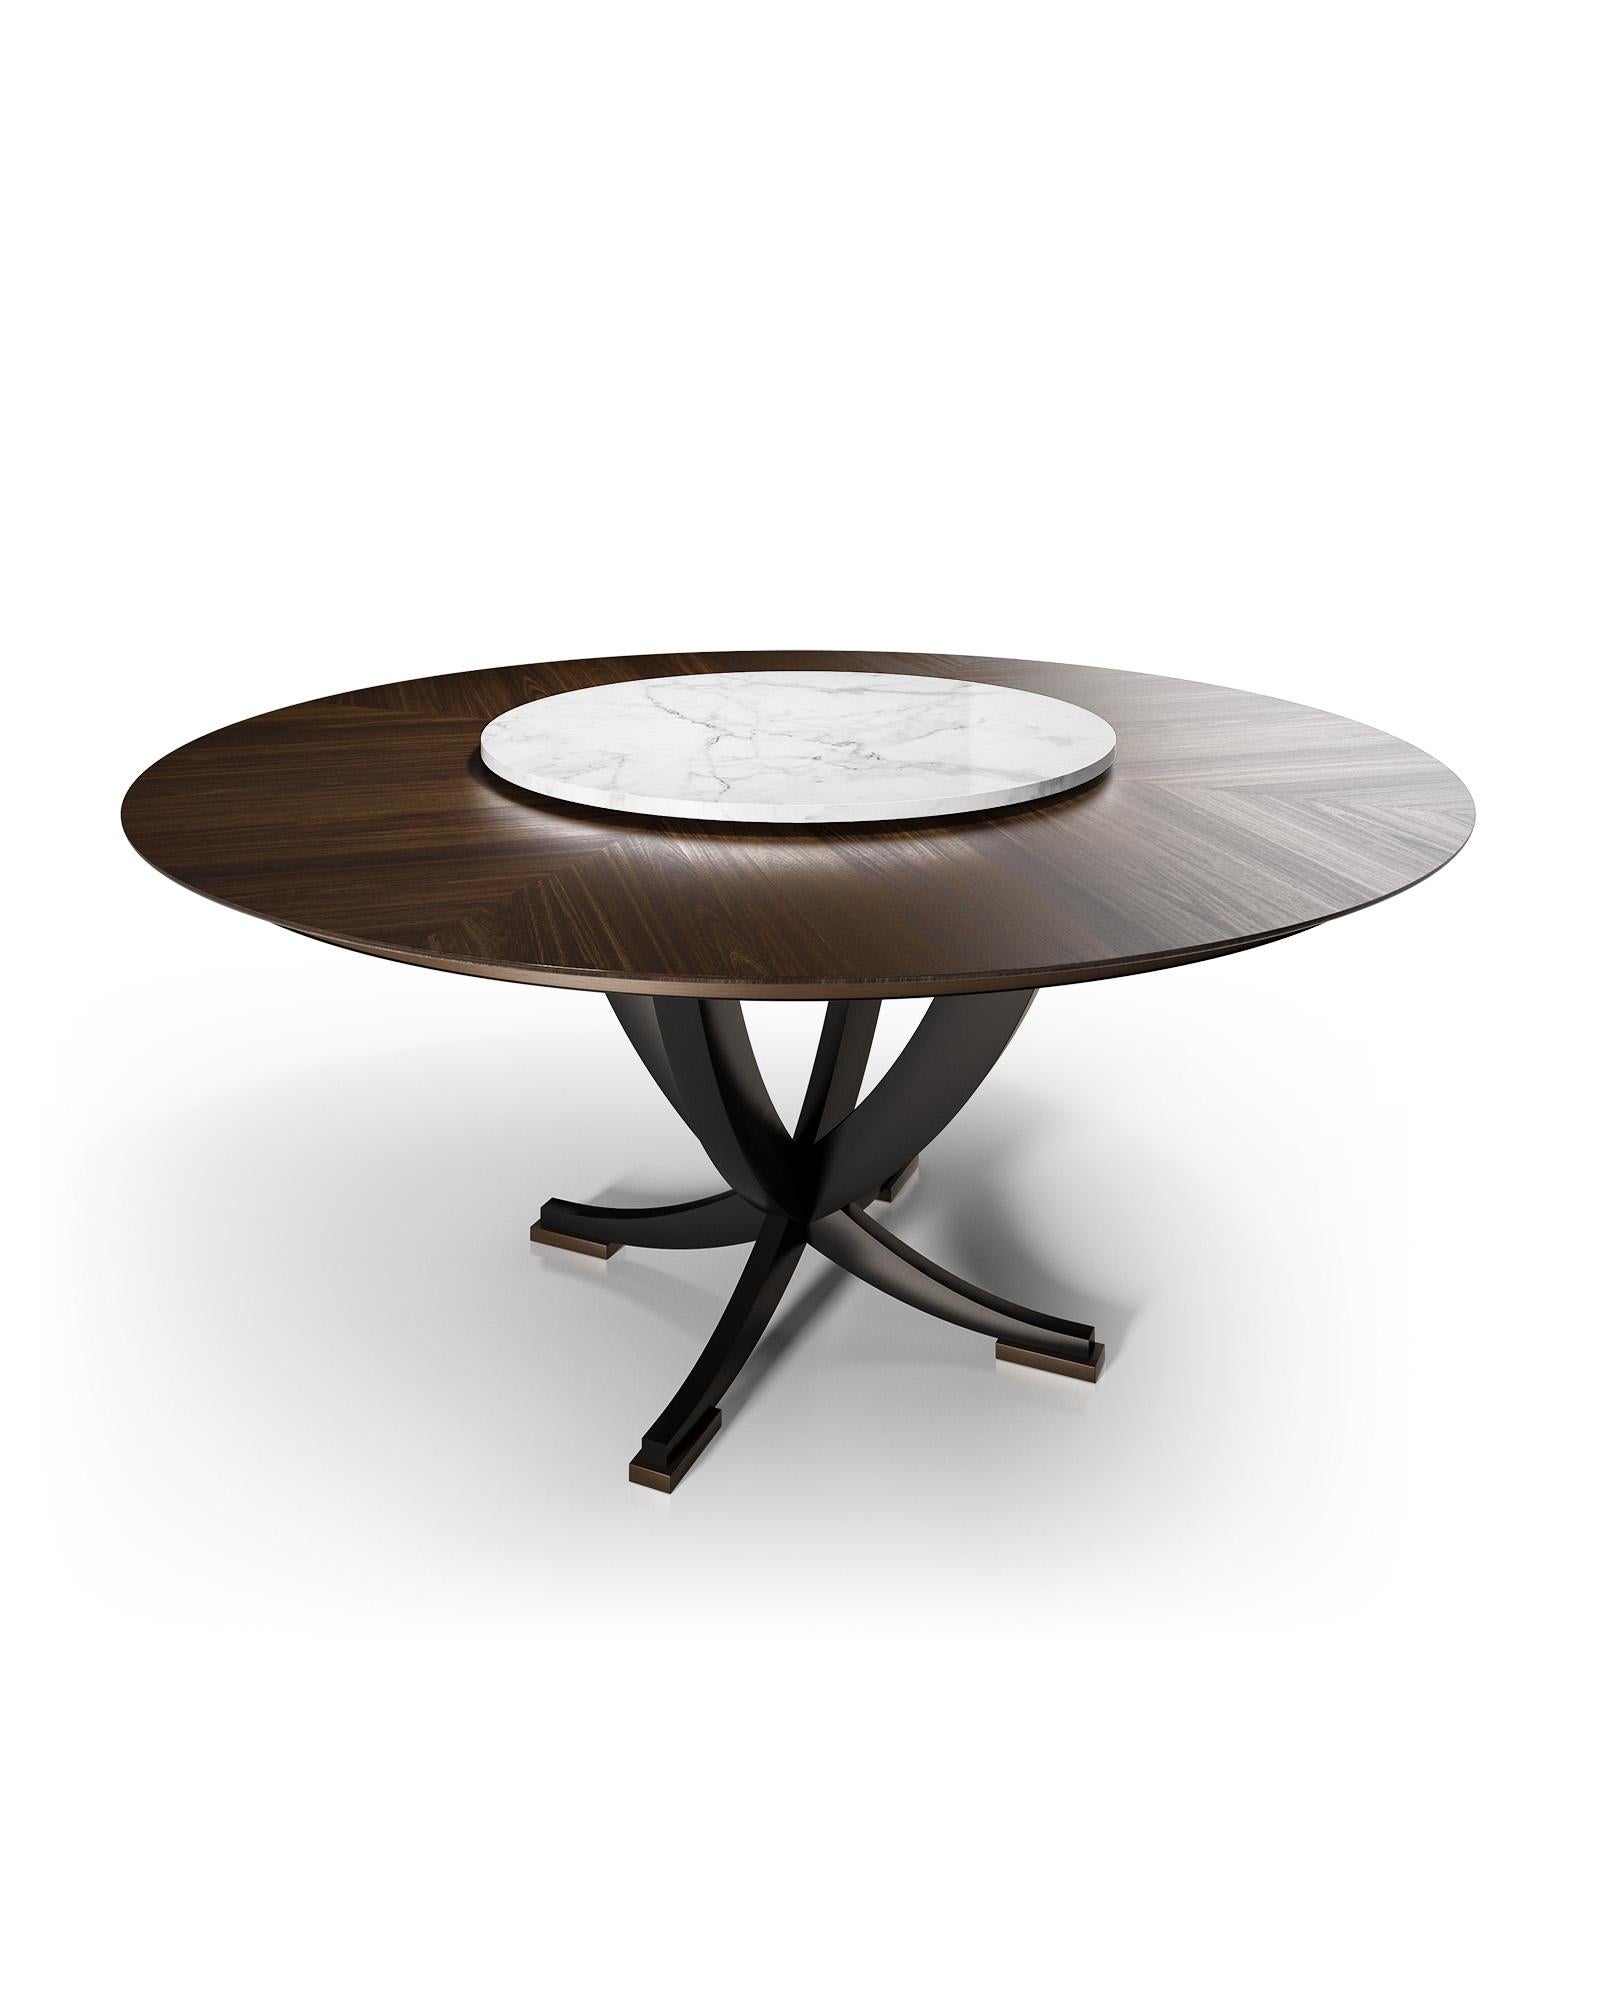 Characterized by a bold aesthetic and chiaroscuro visual contrast, this luxurious dining table will complement any modern interior. Supported by a sophisticated shape on intersecting wooden C-shaped legs, enhanced by a black velvet-like finish and